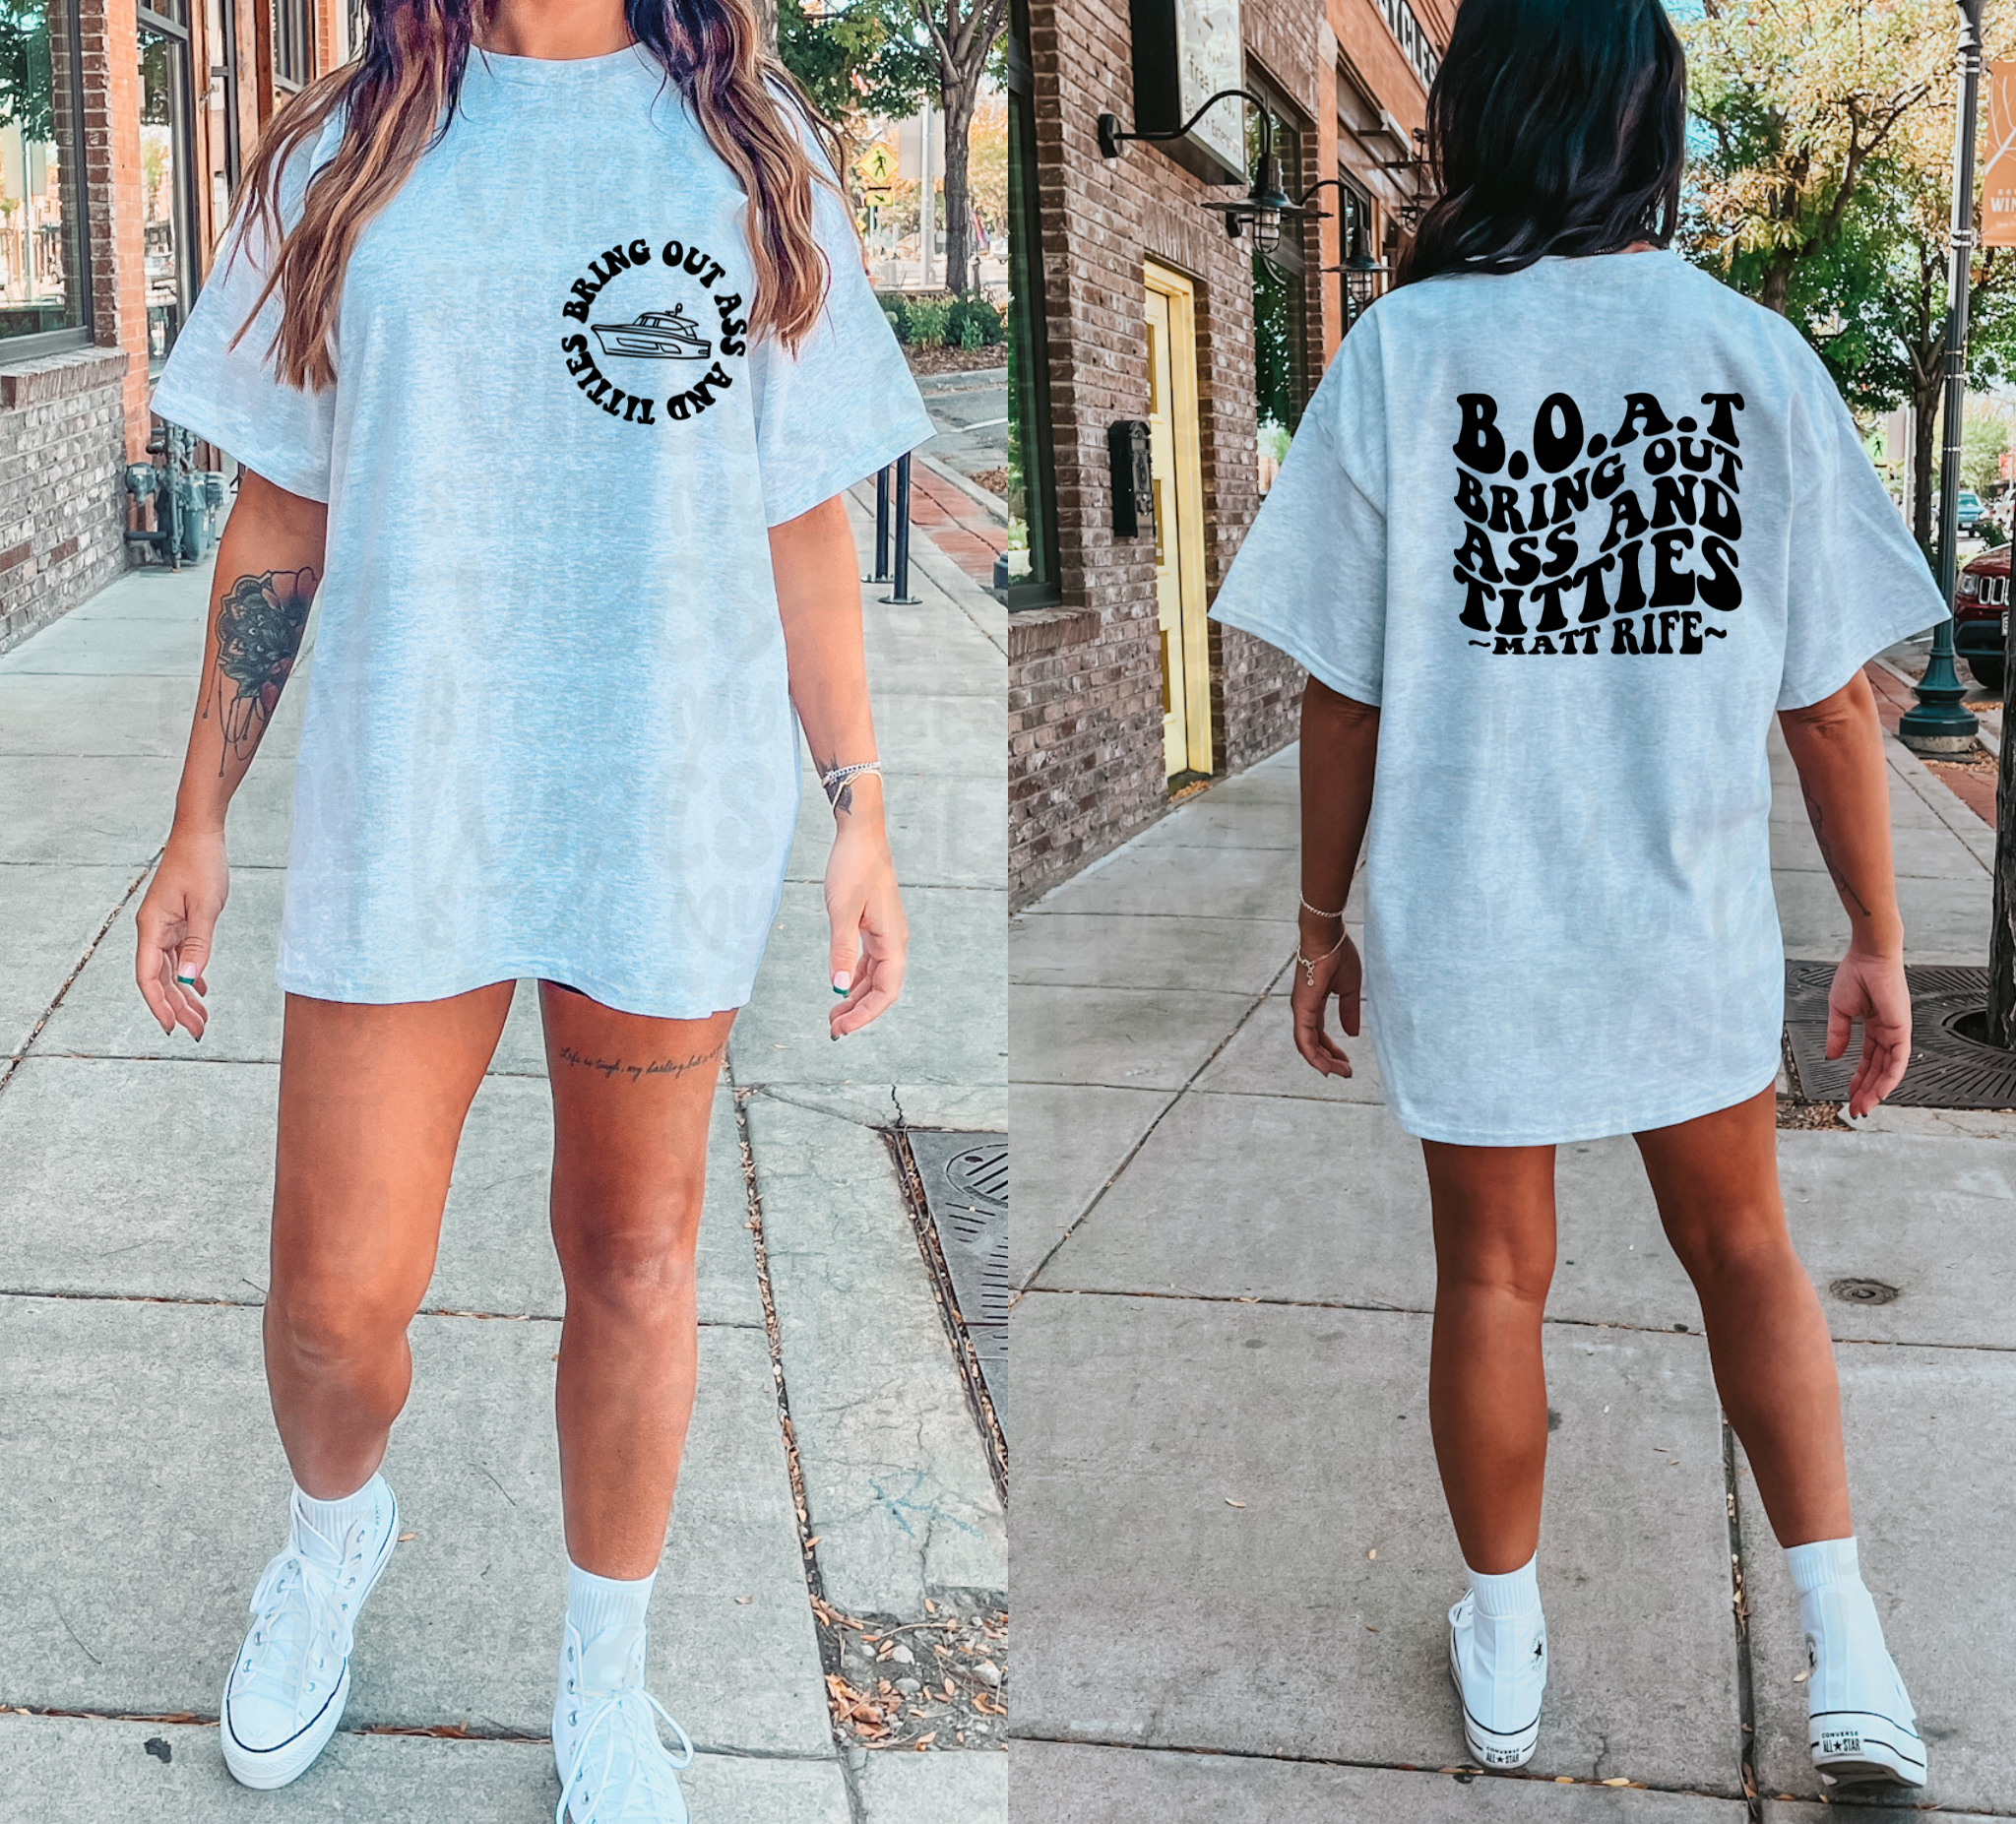 B.O.A.T. Bring Out Ass And Titties (Front & Back) Top Design